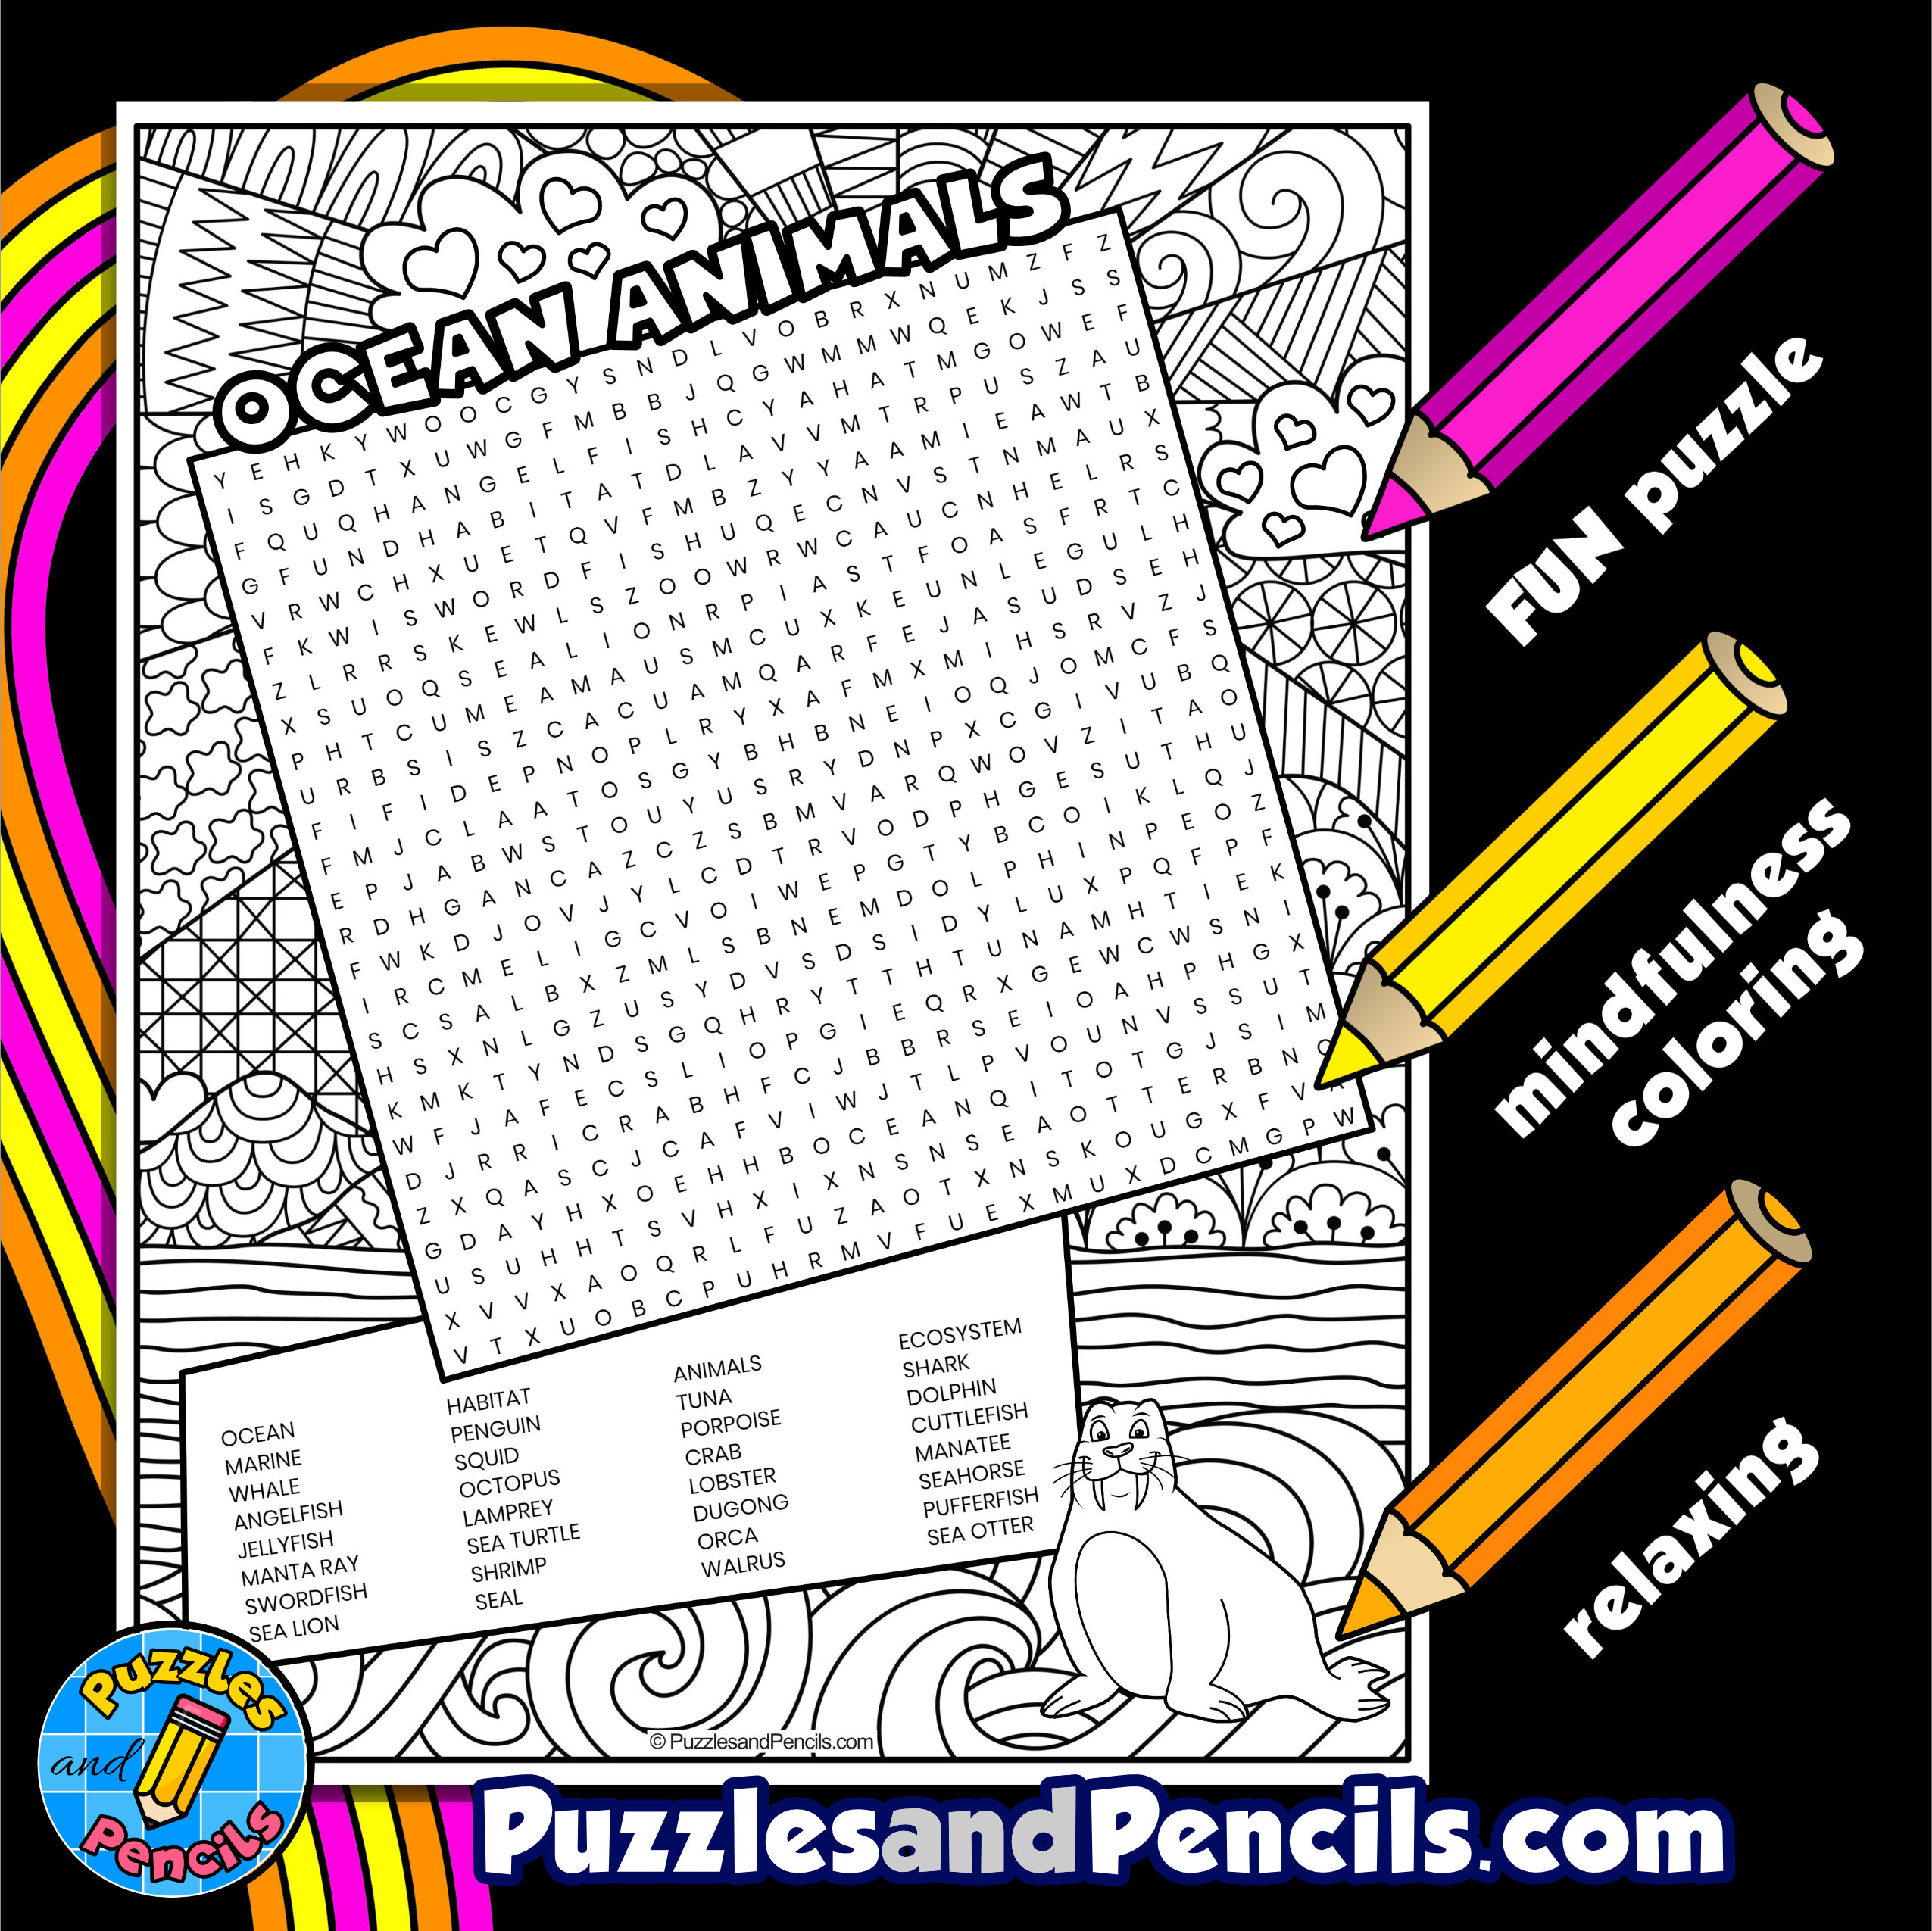 Ocean animals word search puzzle with coloring ocean habitat wordsearch made by teachers